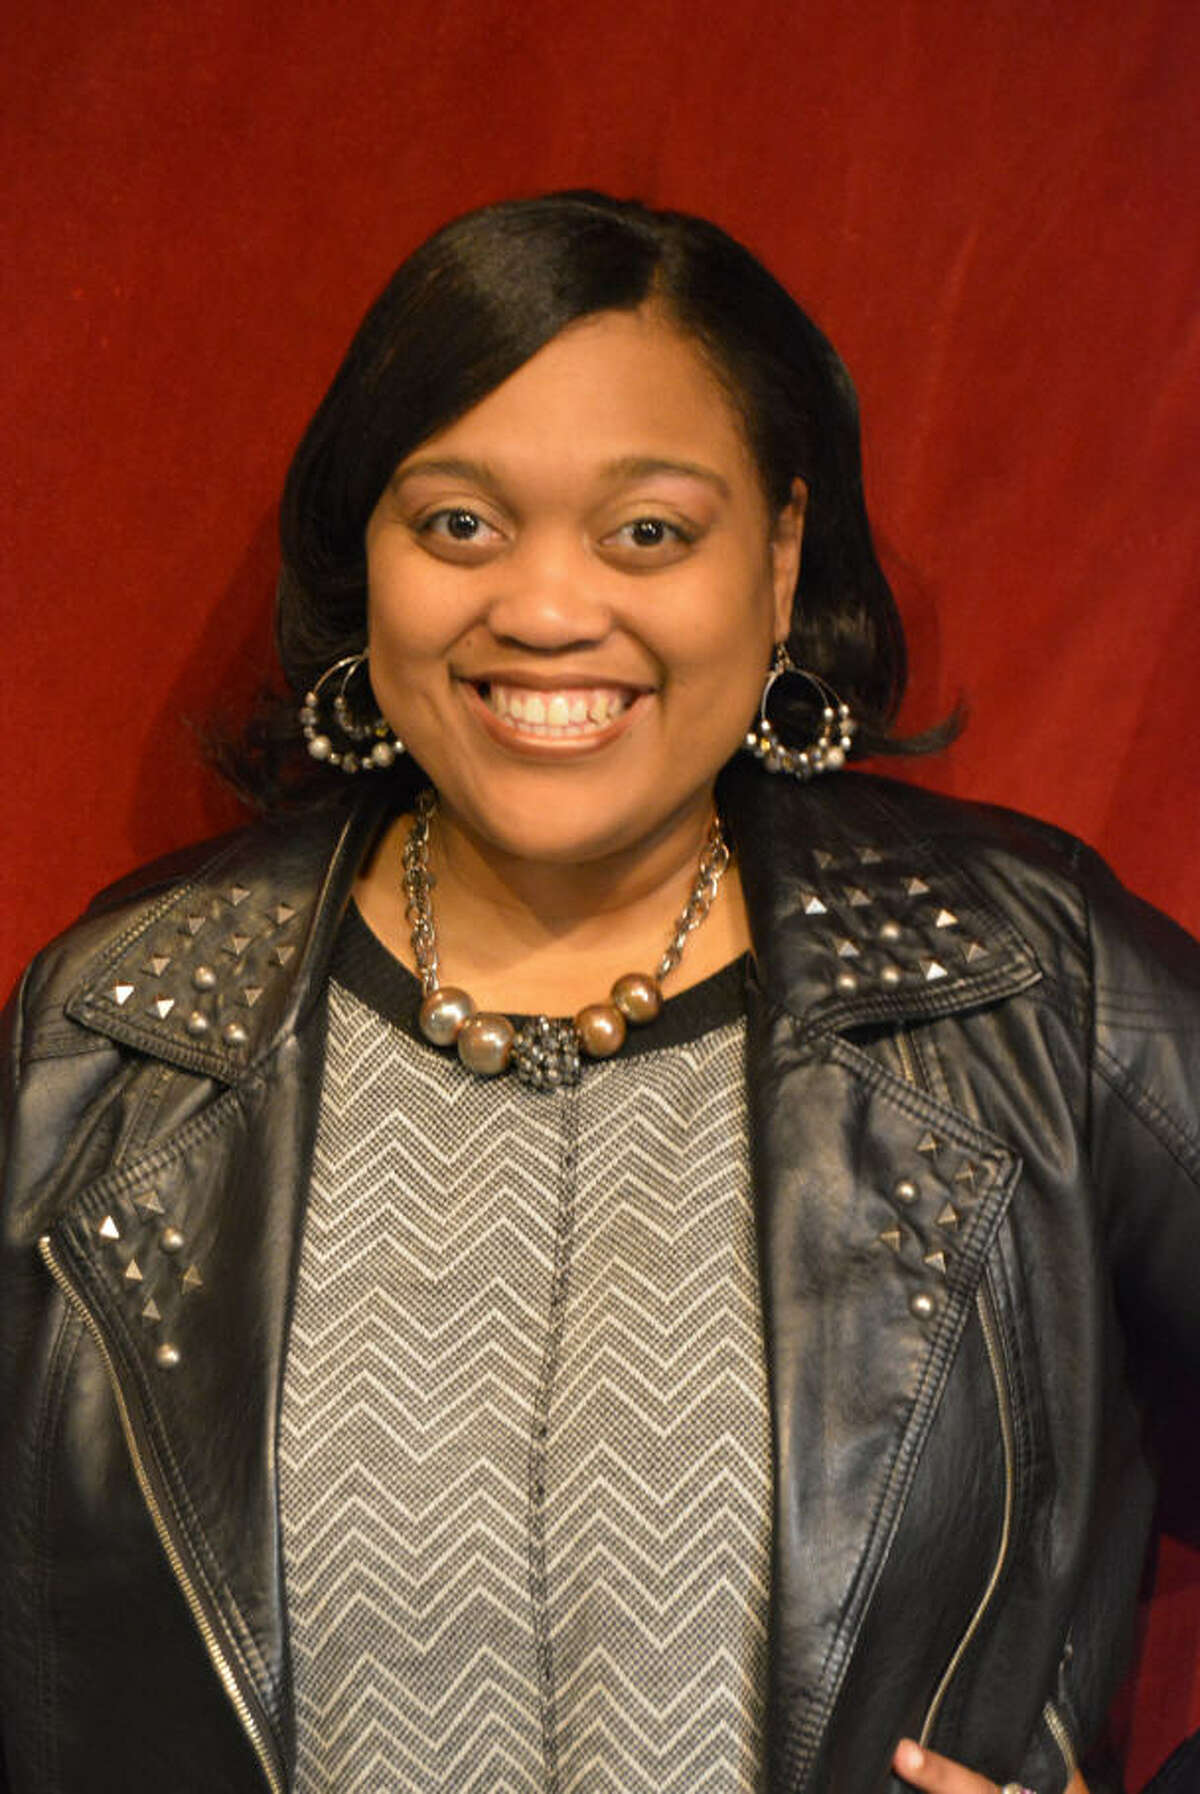 Roshunda Jones is co-directing "Hairspray" at Carver Magnet School and The Kinkaid School in January and February.